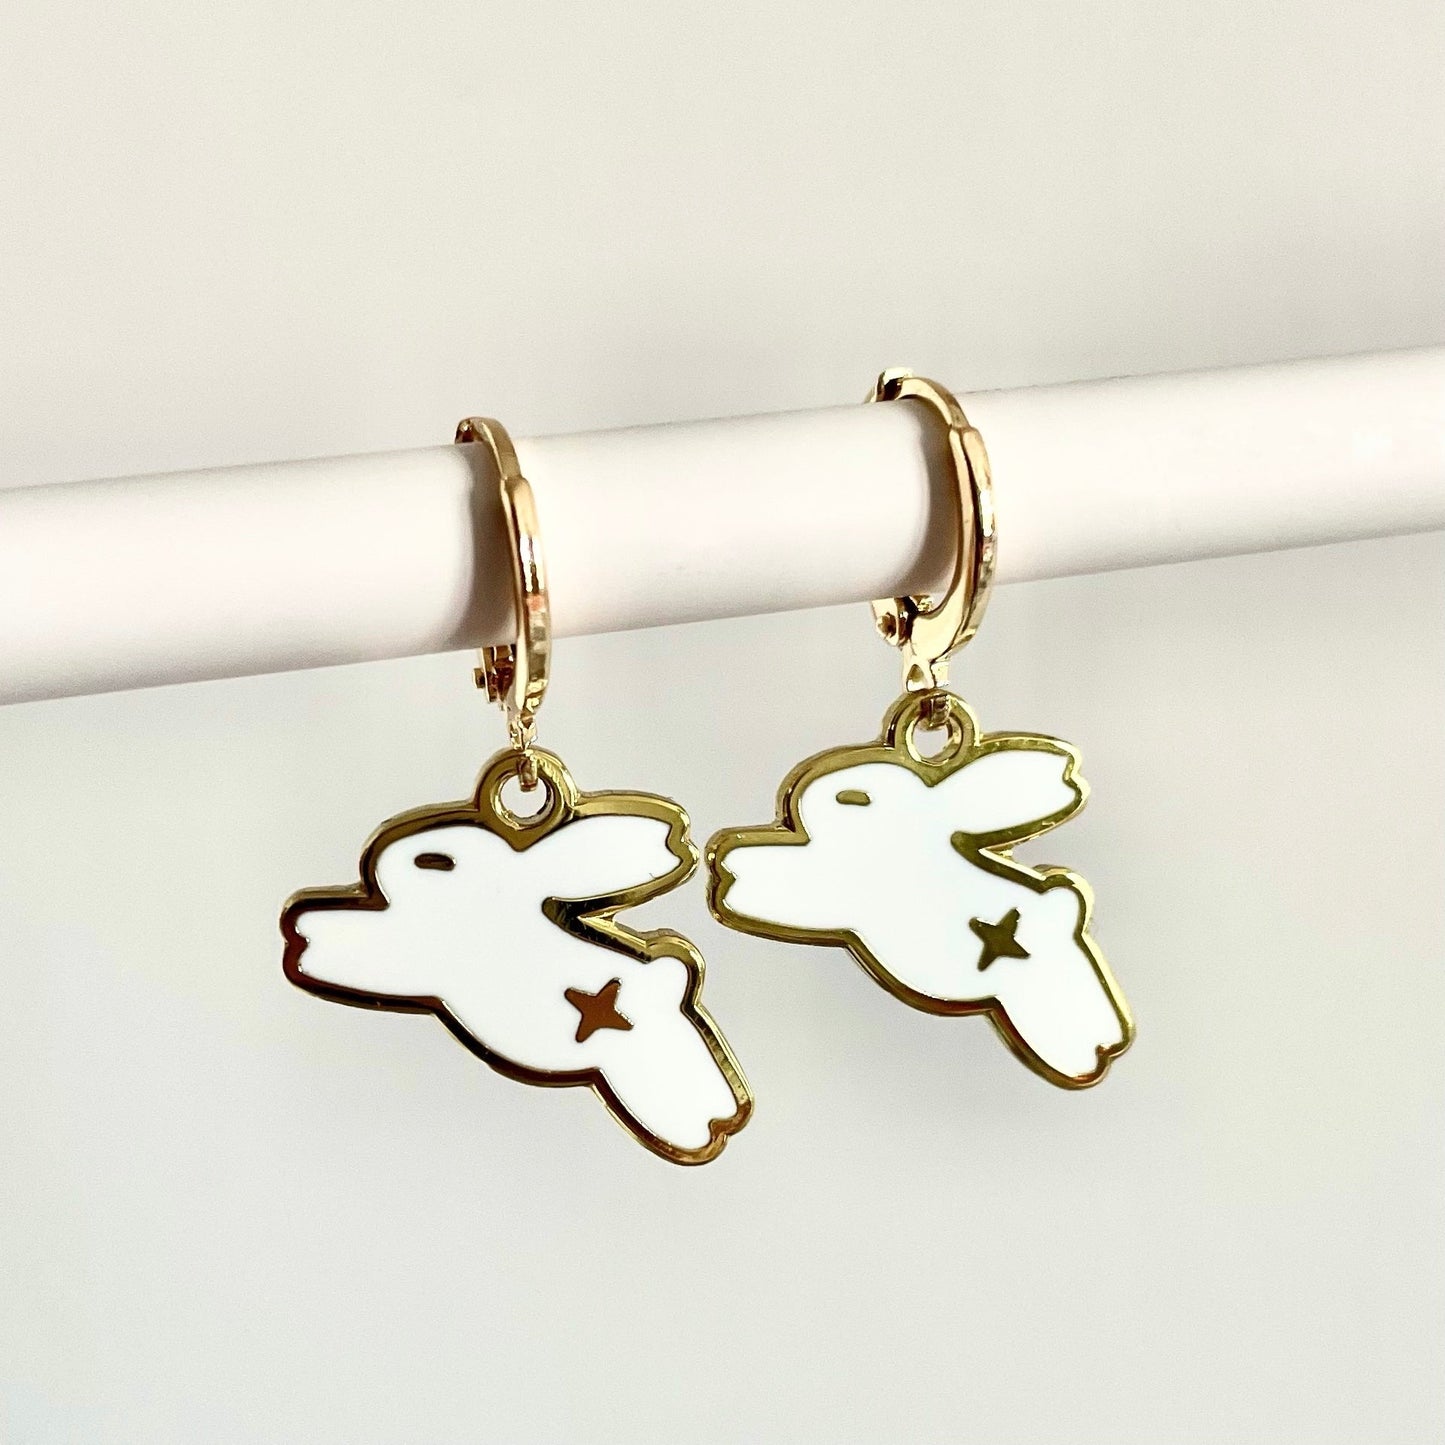 Star Bunny Earrings, Silver or Gold ✧･ﾟ: *